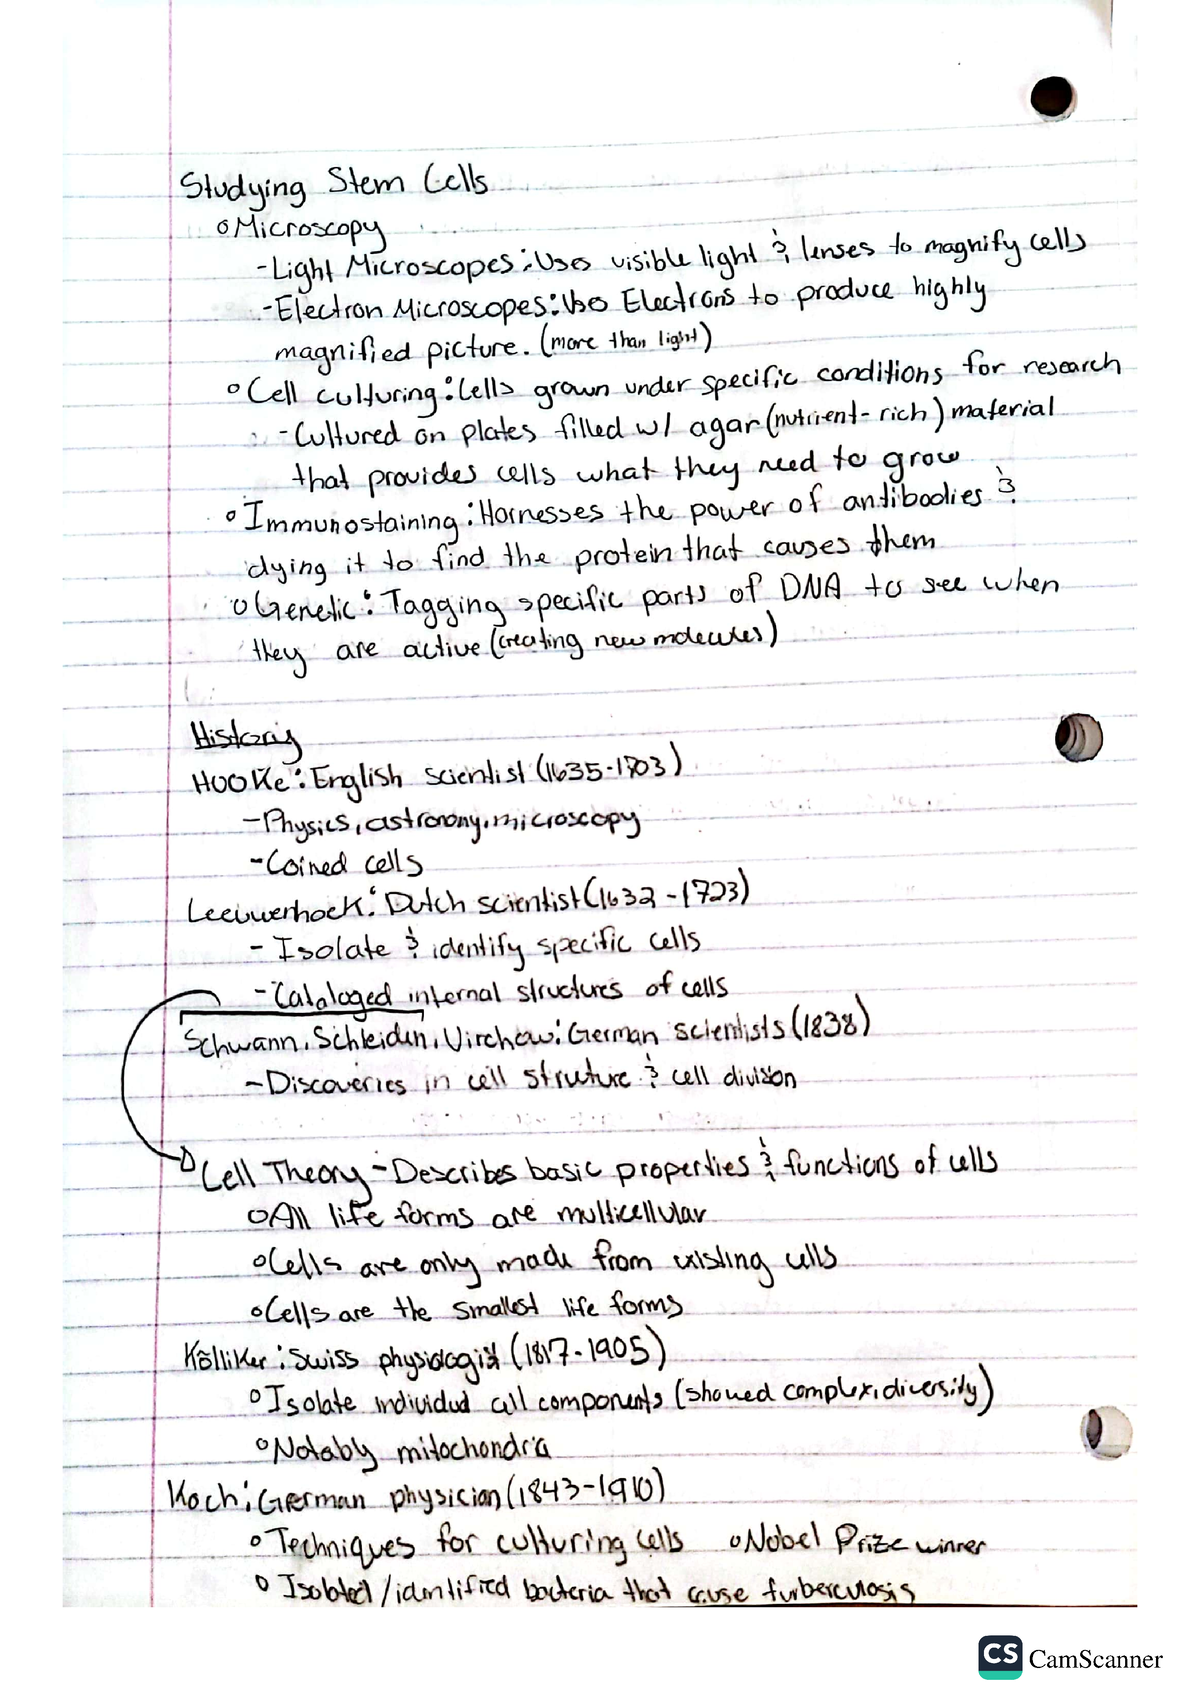 Researching Cells - Notes about cell history and research. Along with ...